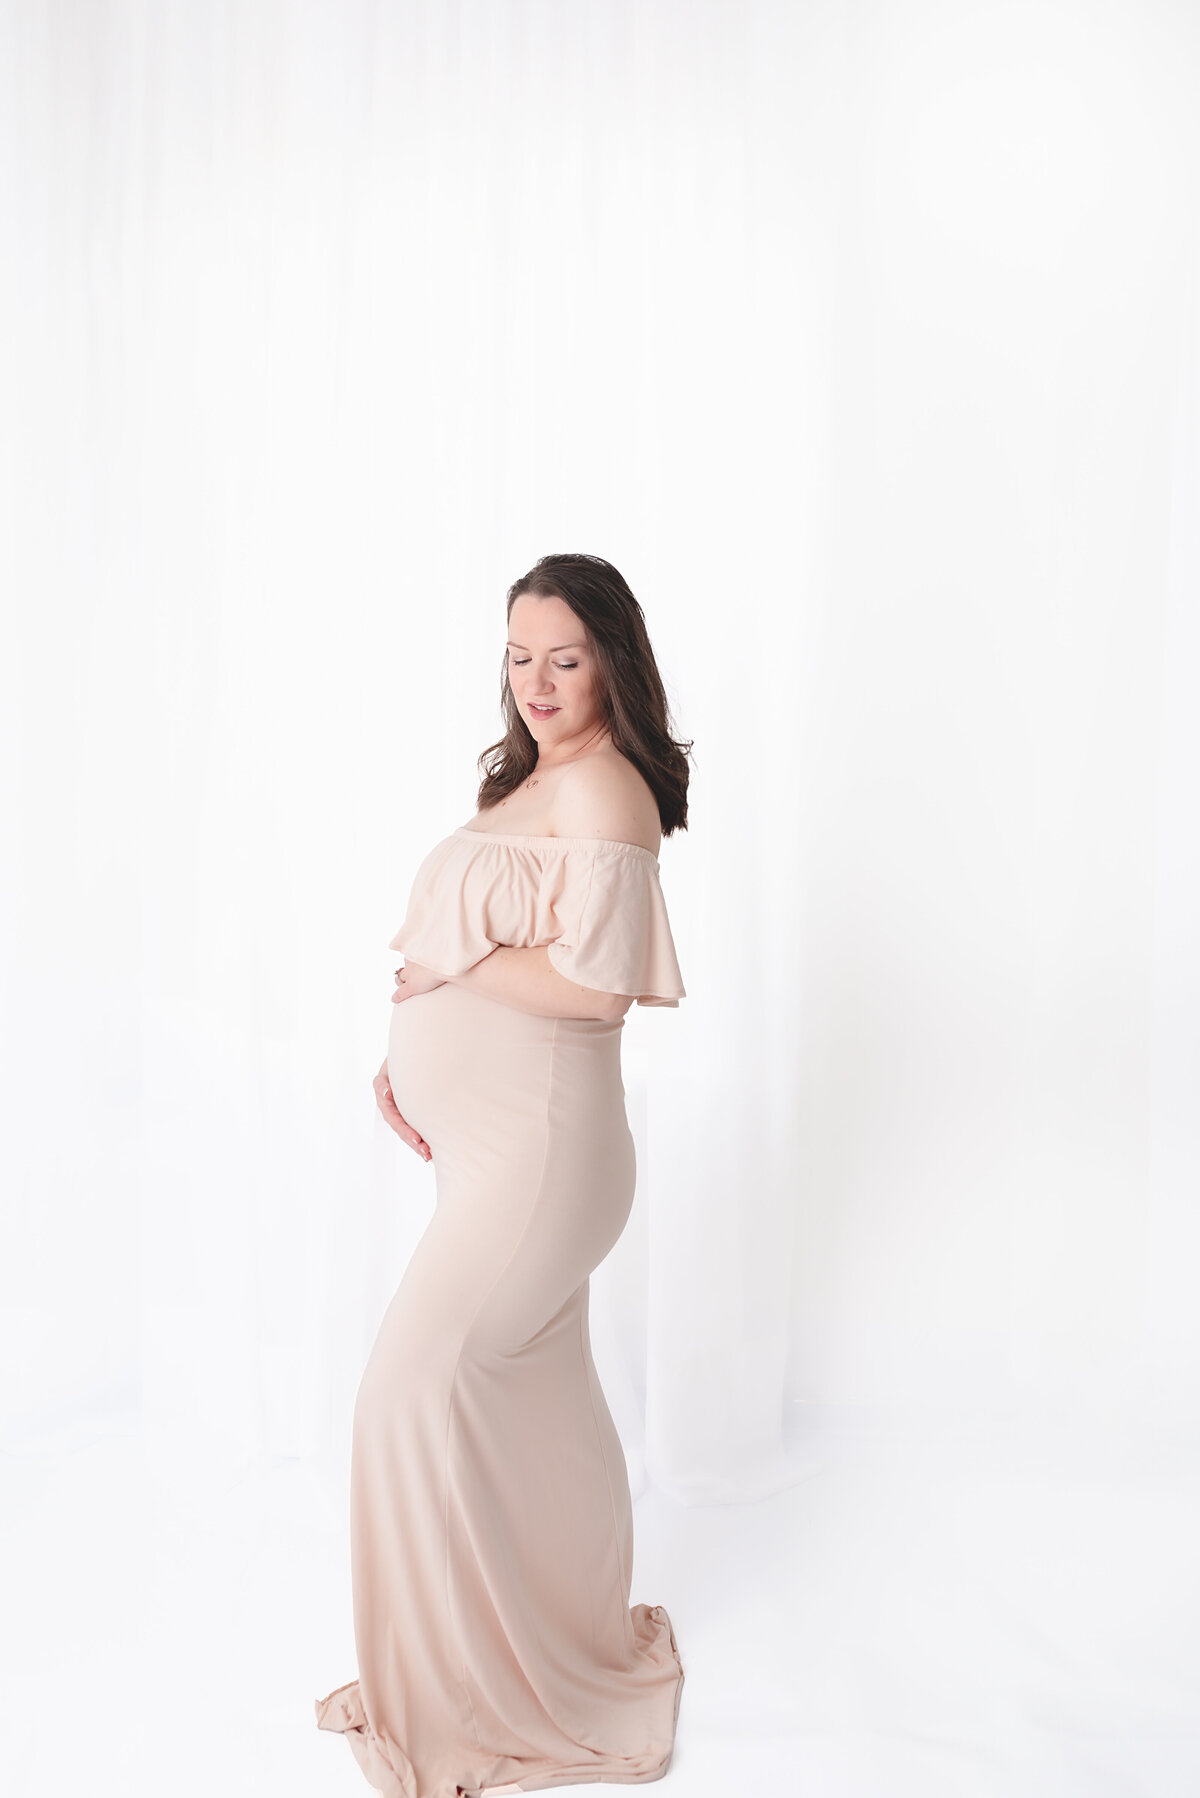 2023 Scheer Family | Maternity Session-6027